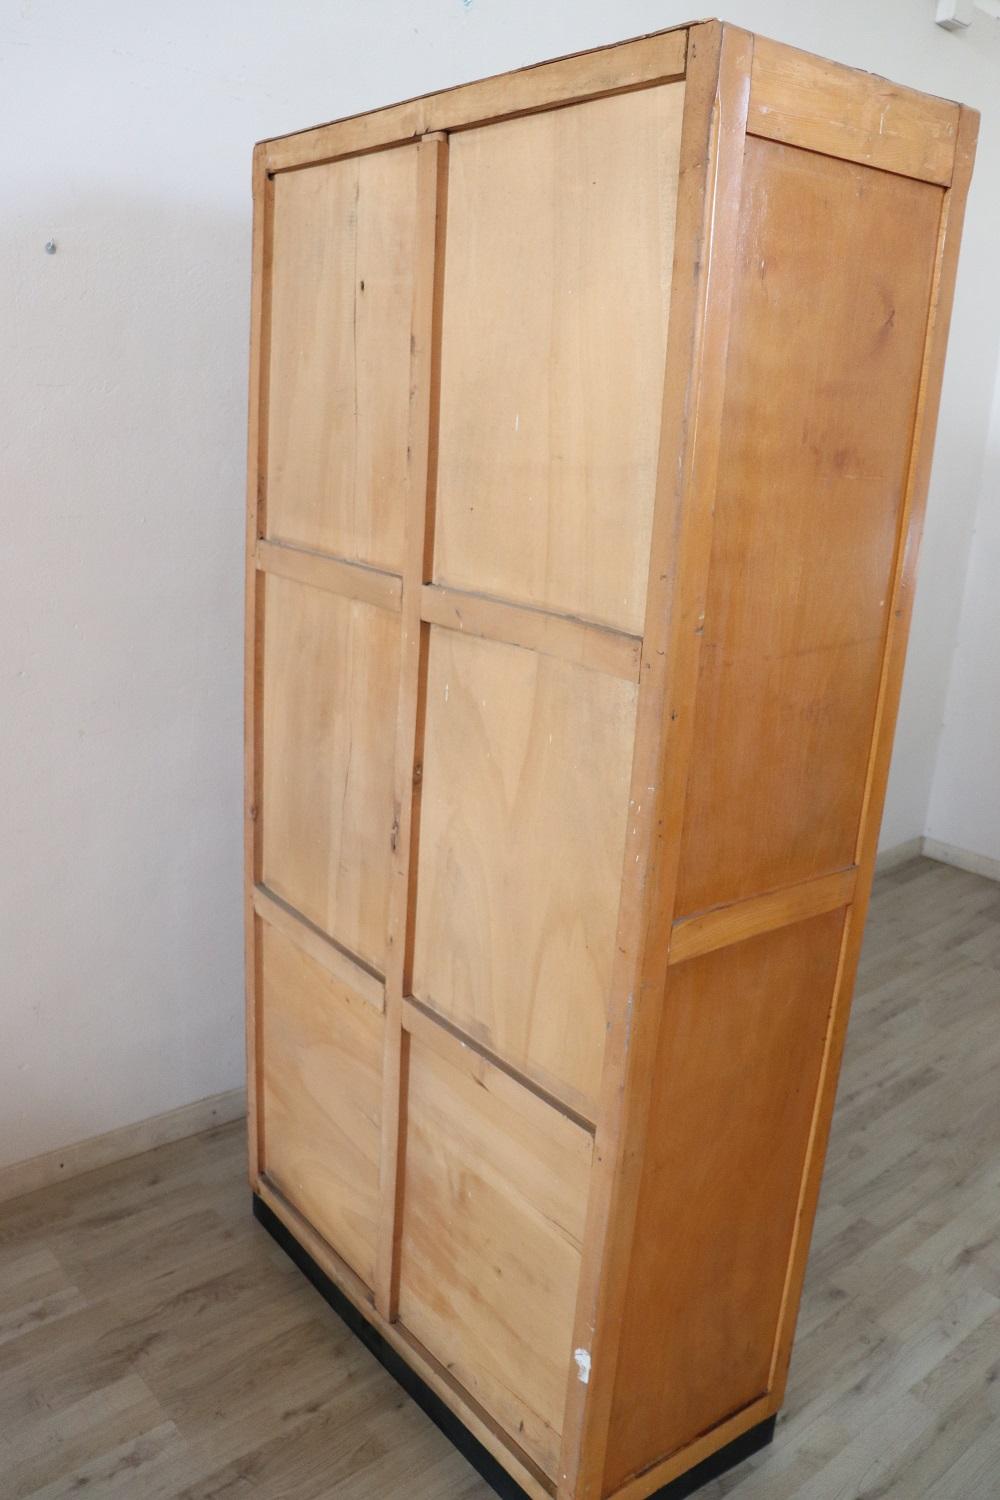 Italian Large Apothecary Cabinet with Handmade Sliding Shutter Doors, 1940s For Sale 5